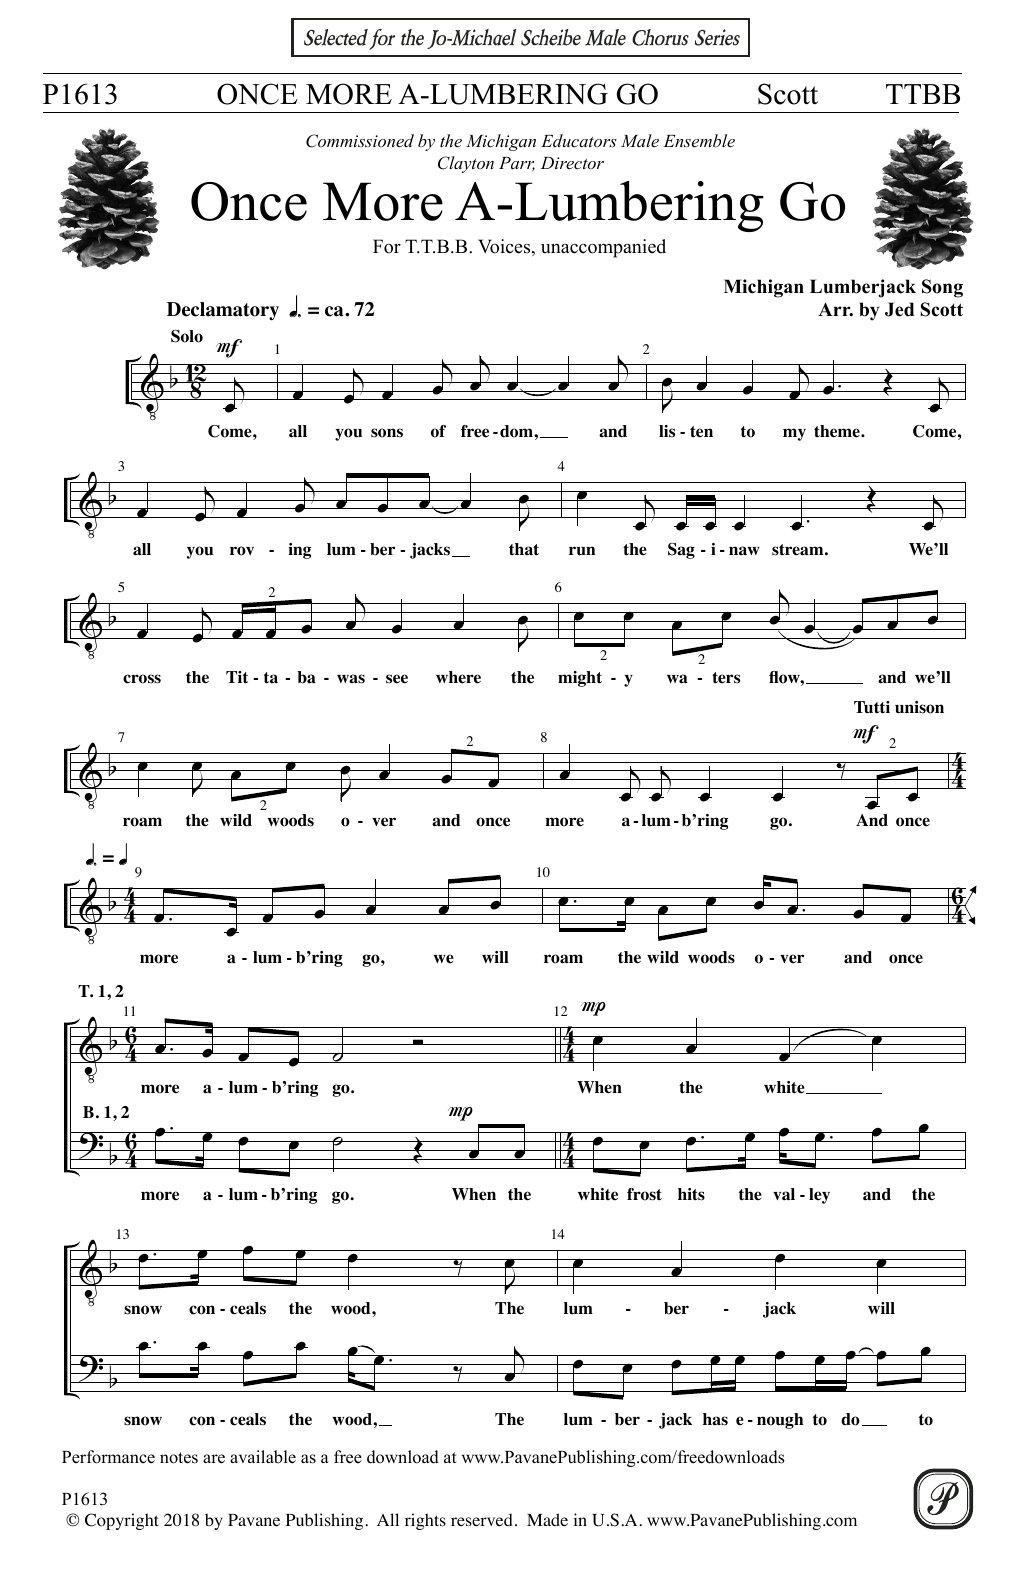 Download Jed Scott Once More A-Lumbering Go Sheet Music